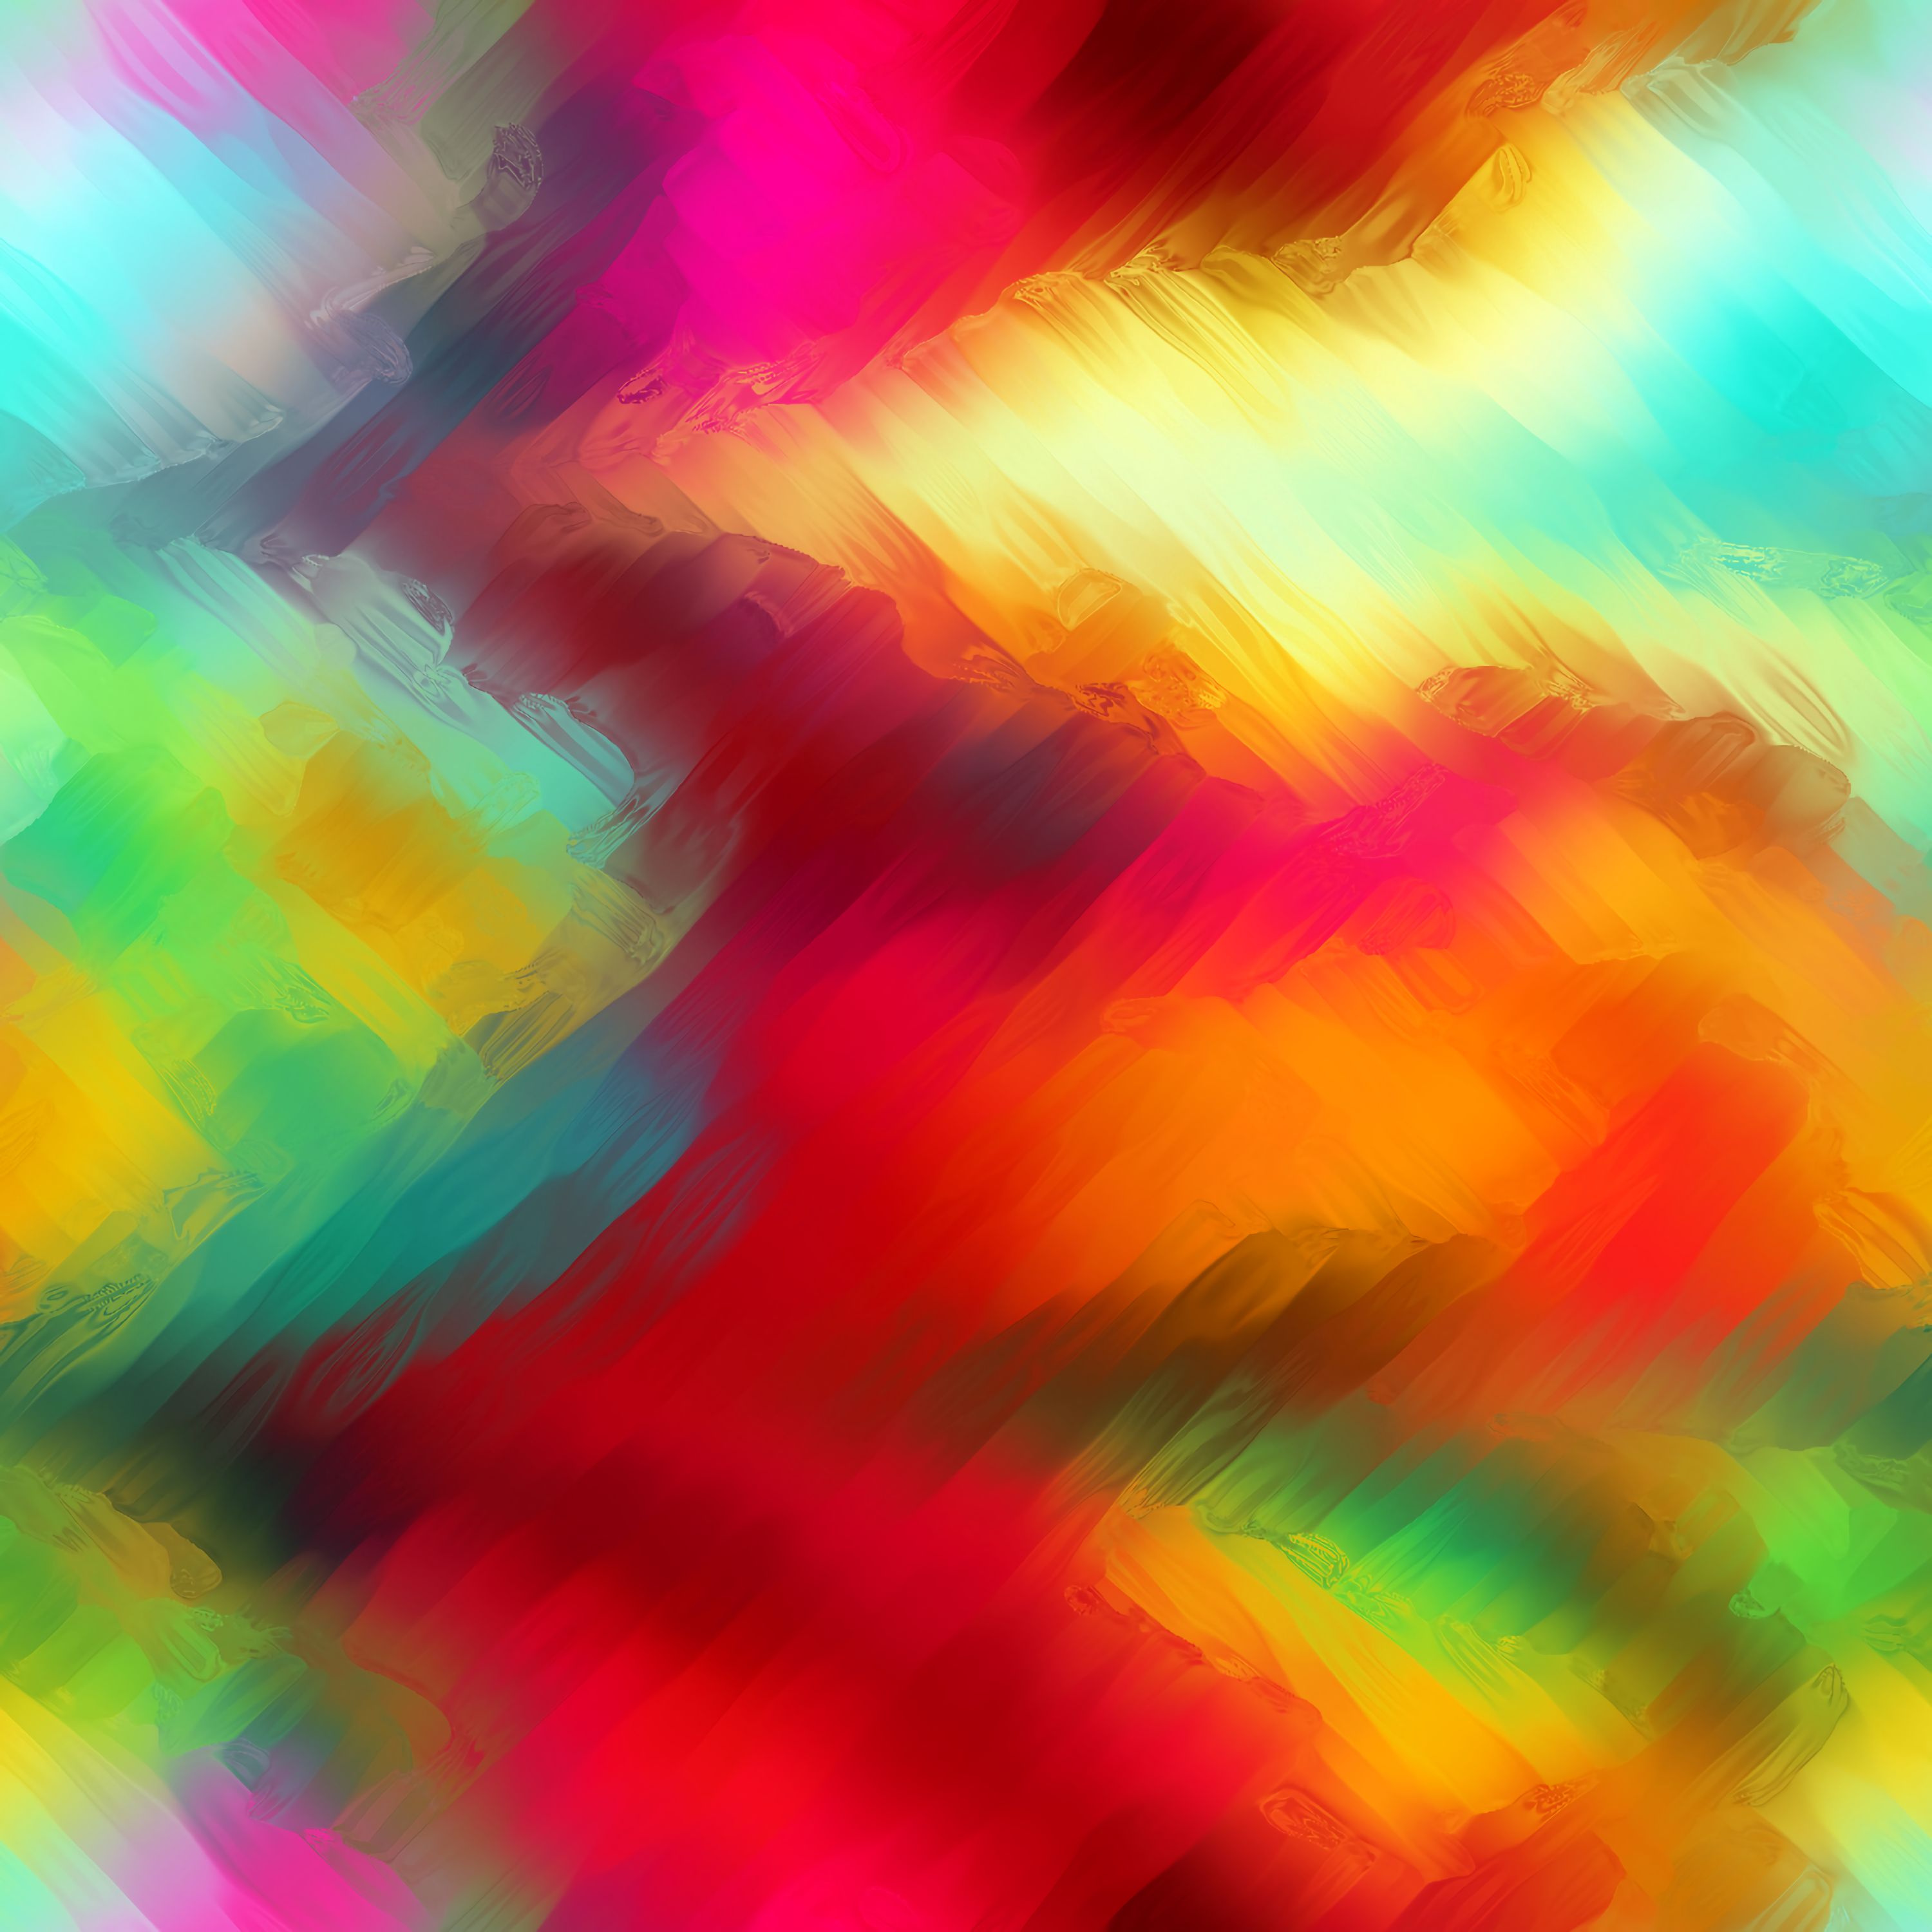 multicolored, abstract, motley, paint, mixing, blurred, fuzzy, strokes